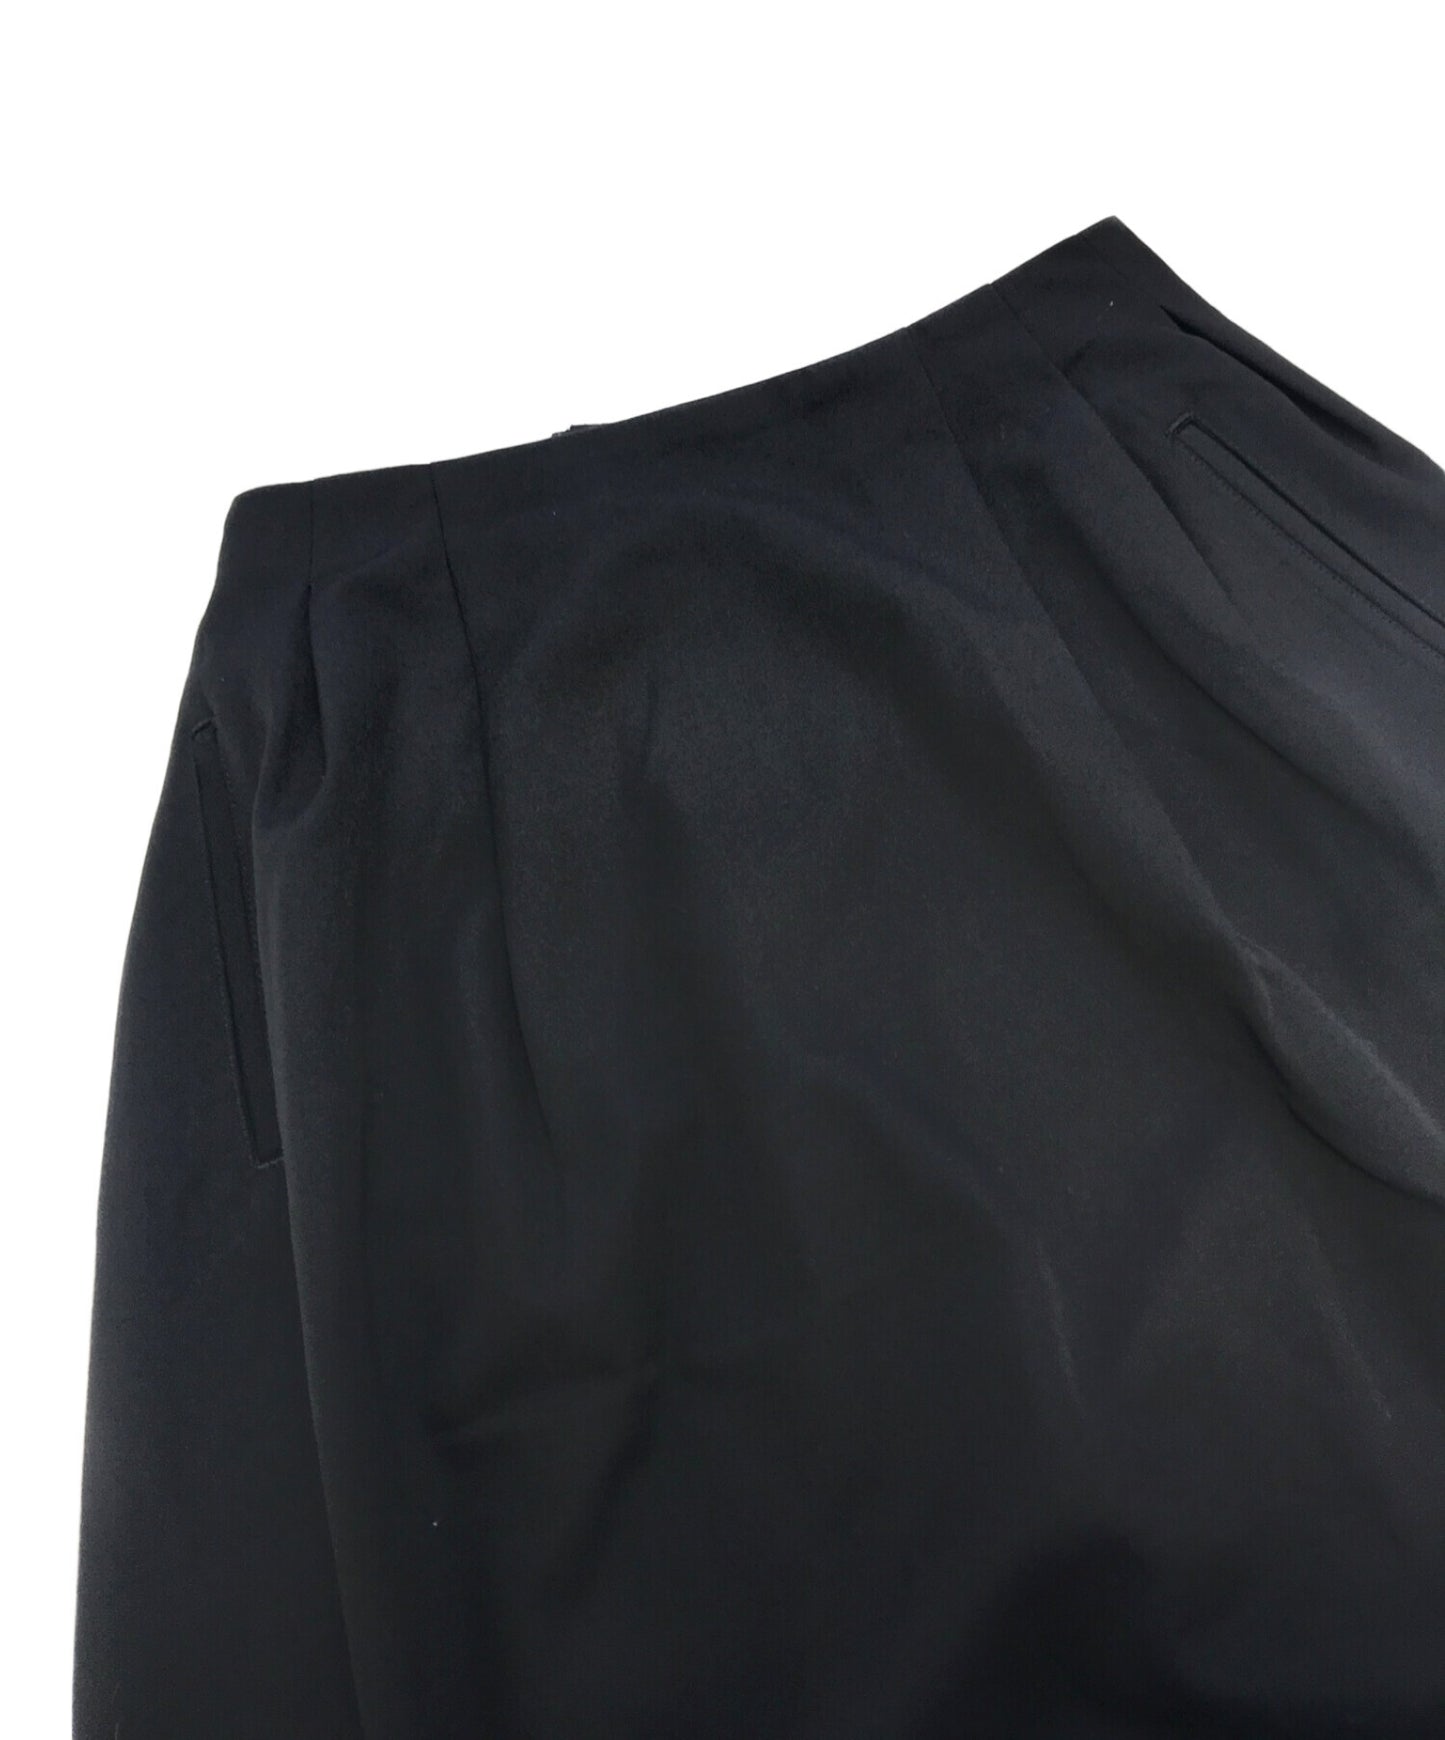 [Pre-owned] Y's [OLD] Back Button Shaped Skirt YV-S02-110